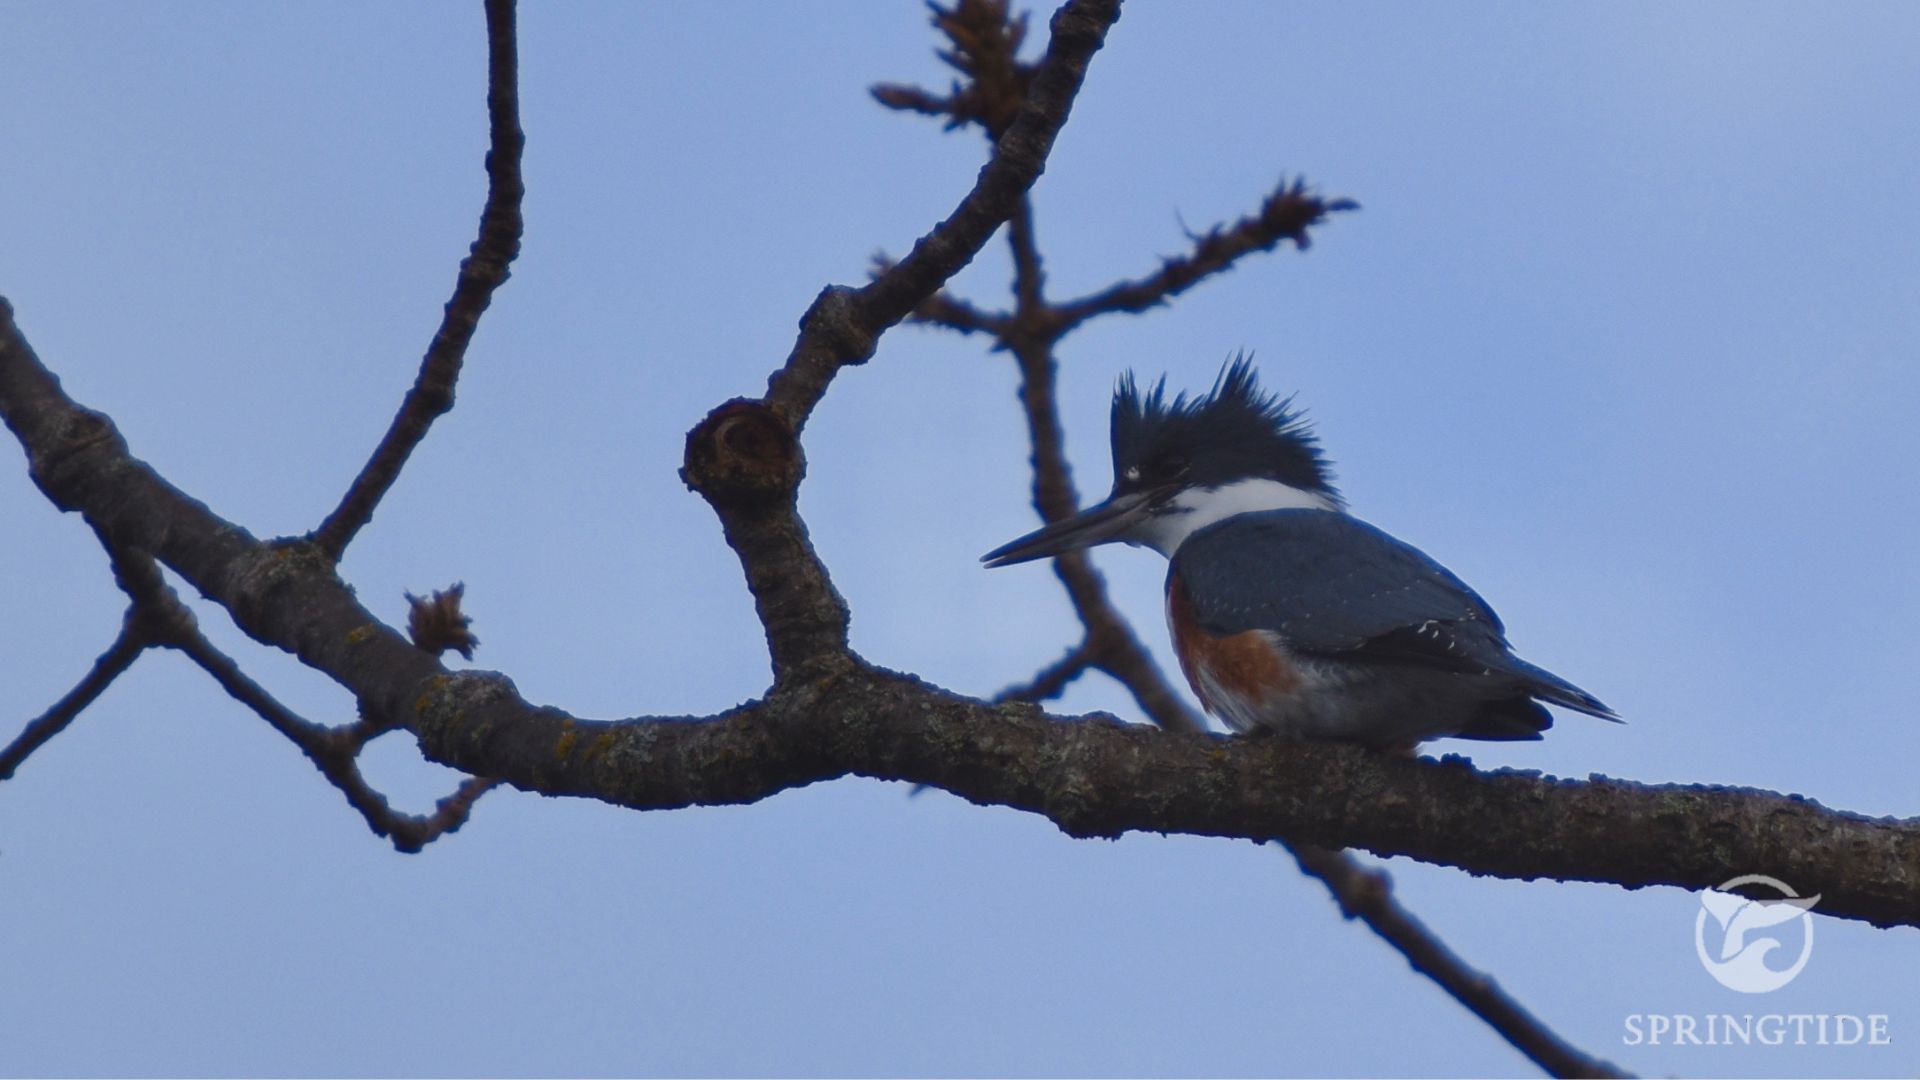 A Belted Kingfisher perched atop a branch. Source: SpringTide Whale Watching.